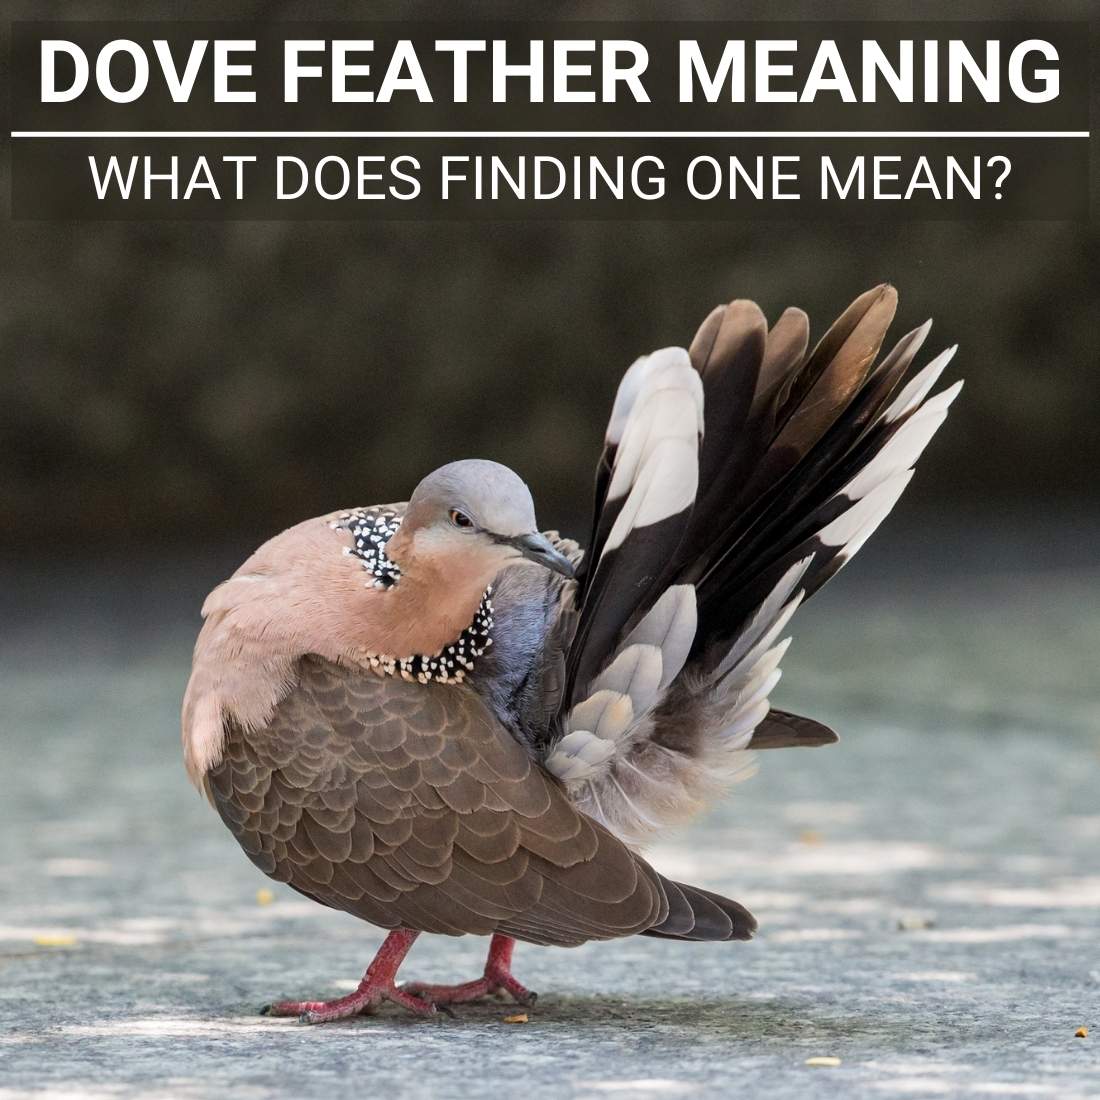 Dove Feather Meaning